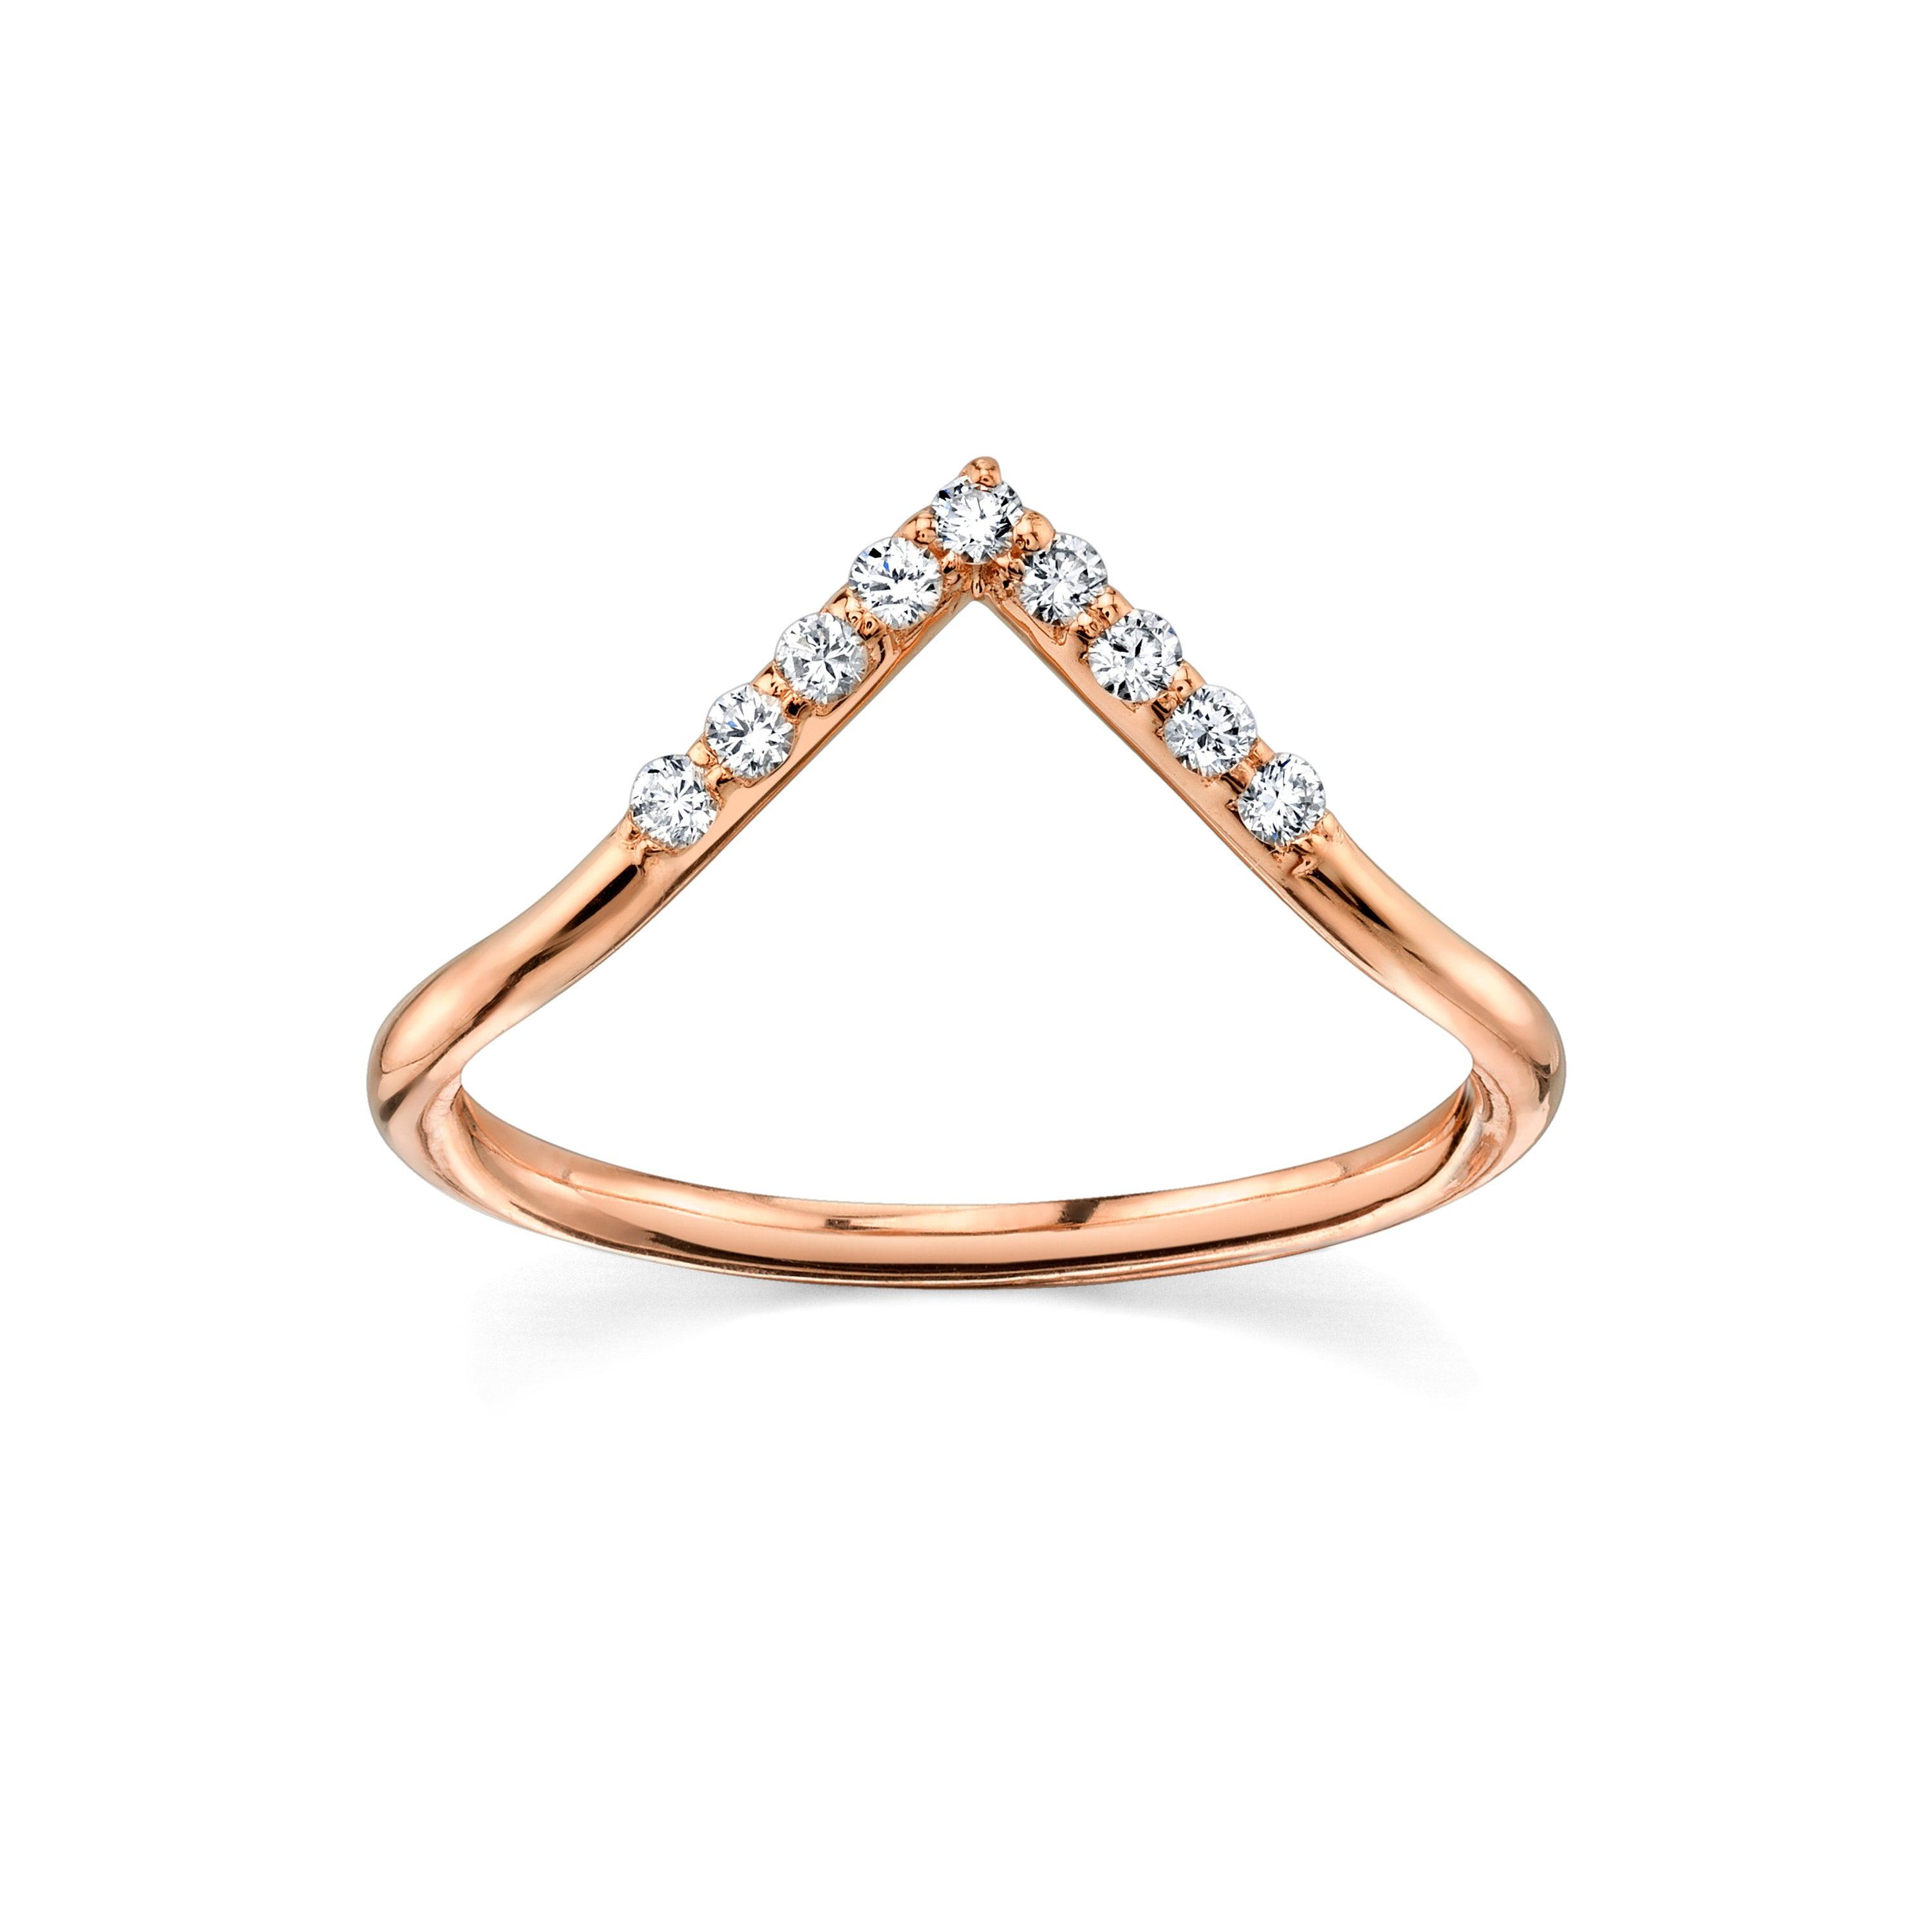 Three Stone Oval Diamond Engagement RingWith Triangles at